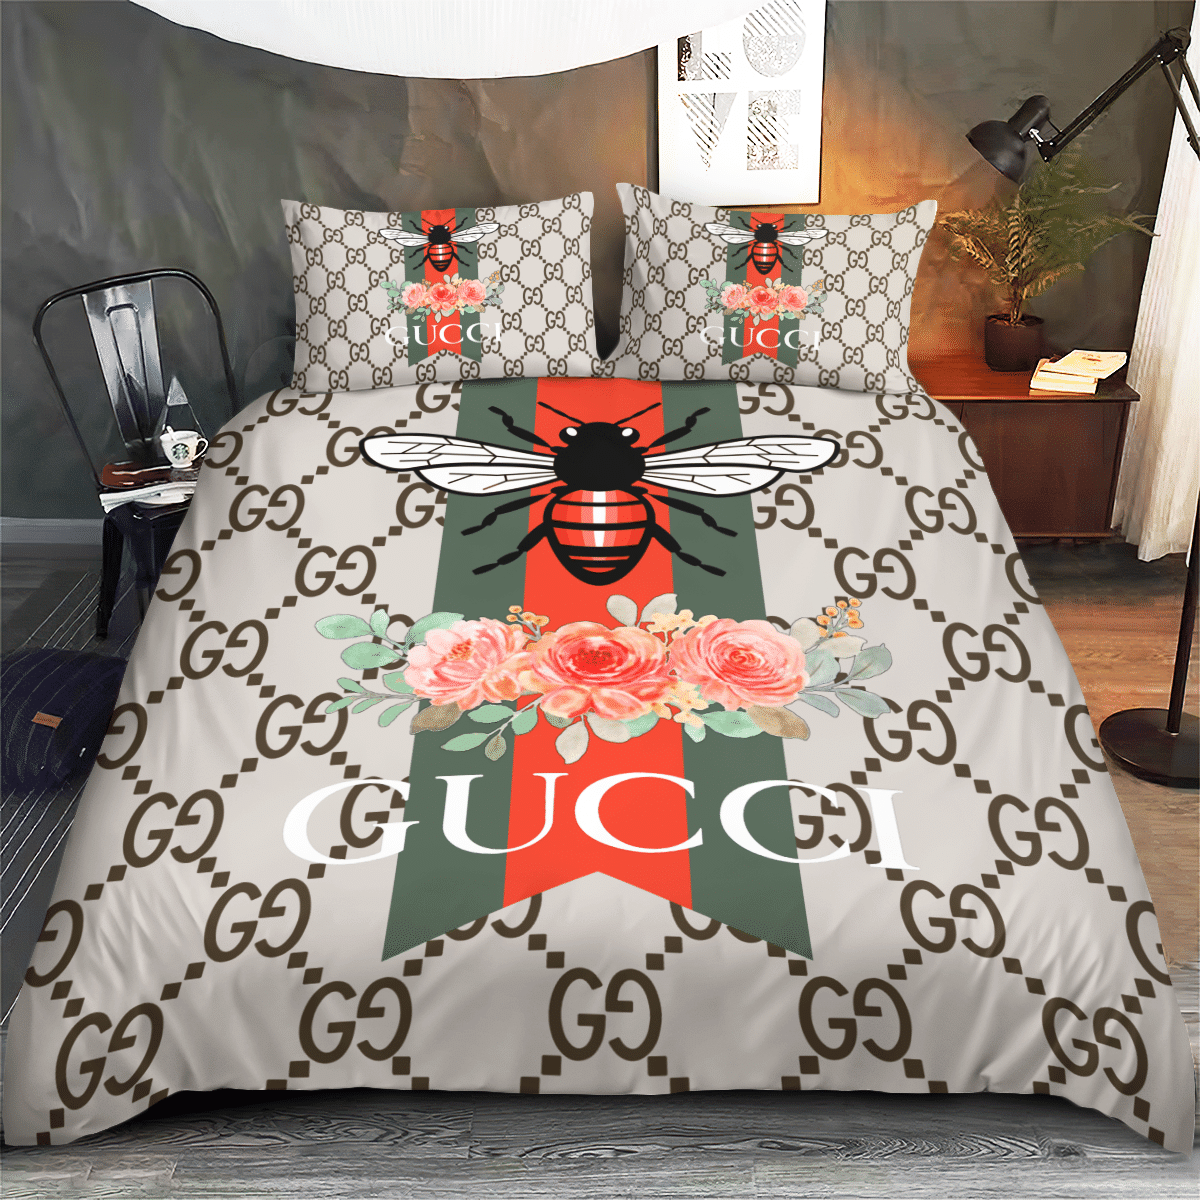 Let me show you about some luxury brand bedding set 2022 103